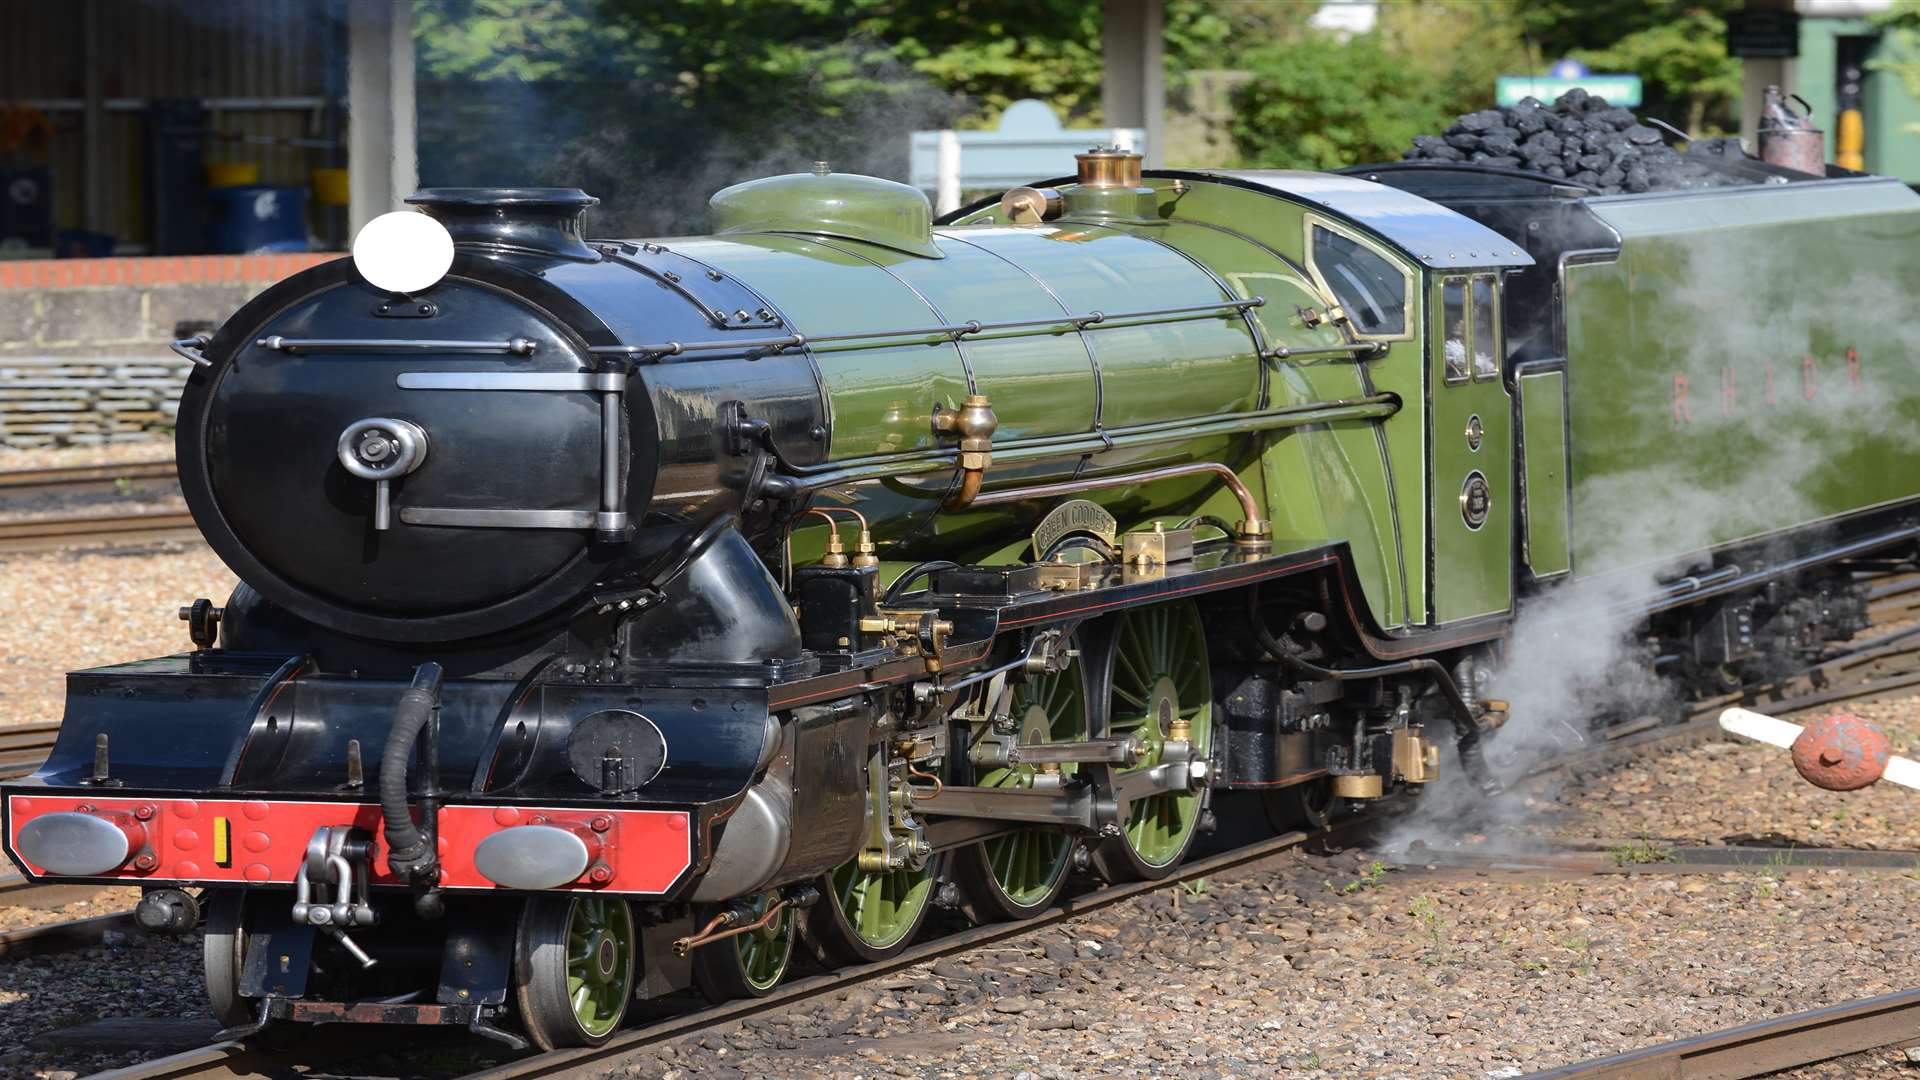 90th birthday celebrations of two of the railway's loco's, Green Goddess and Northern Chief